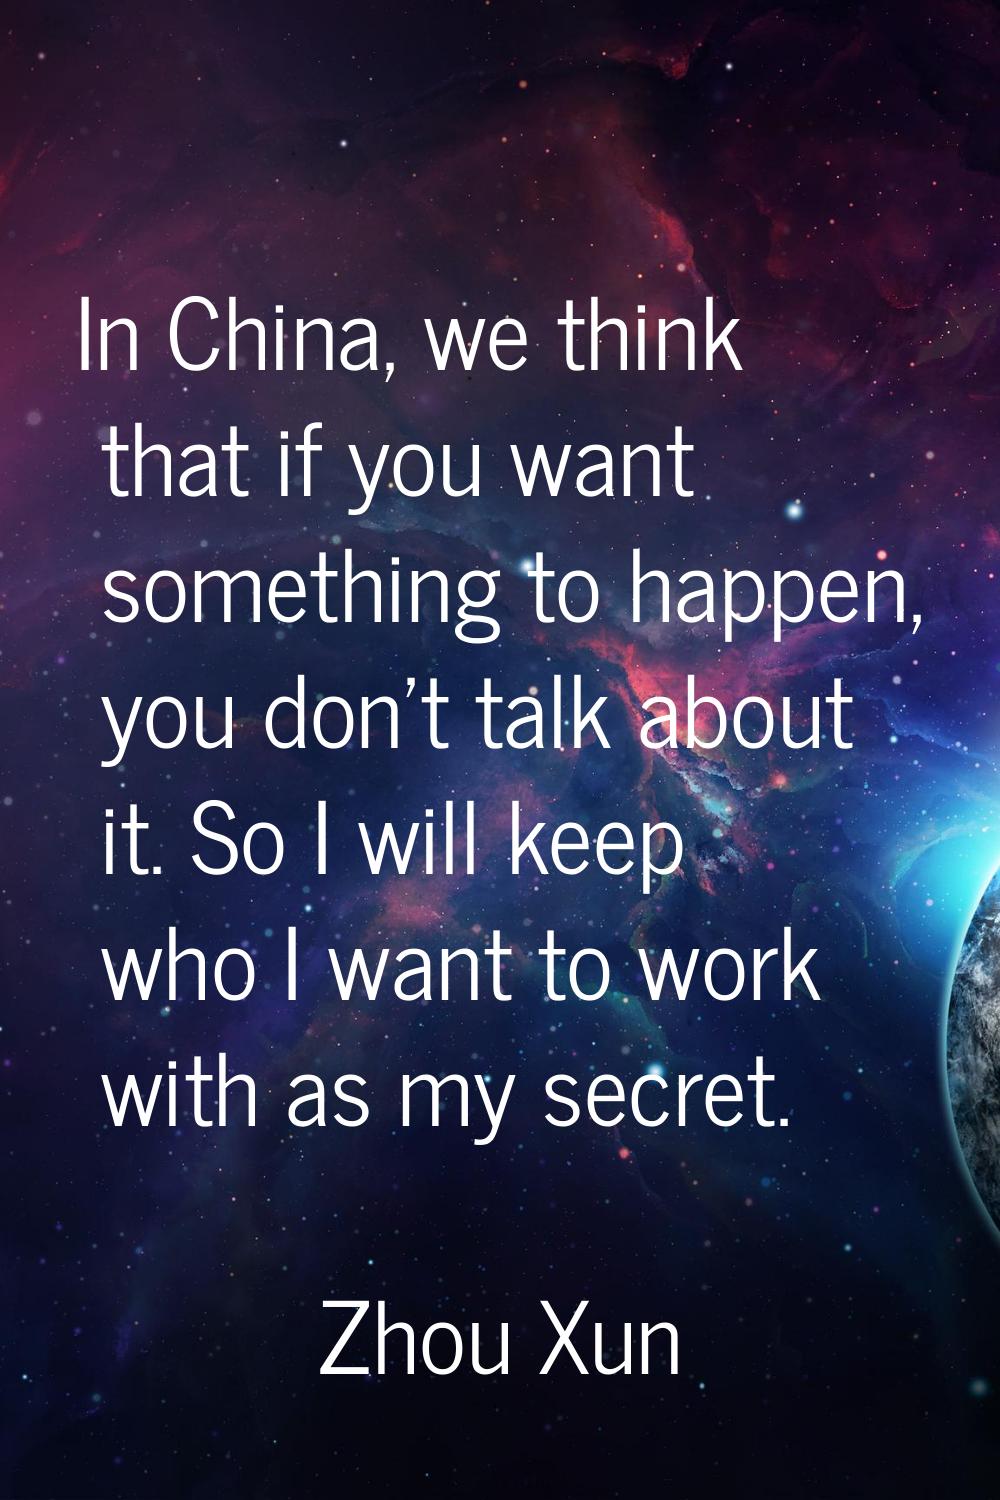 In China, we think that if you want something to happen, you don't talk about it. So I will keep wh